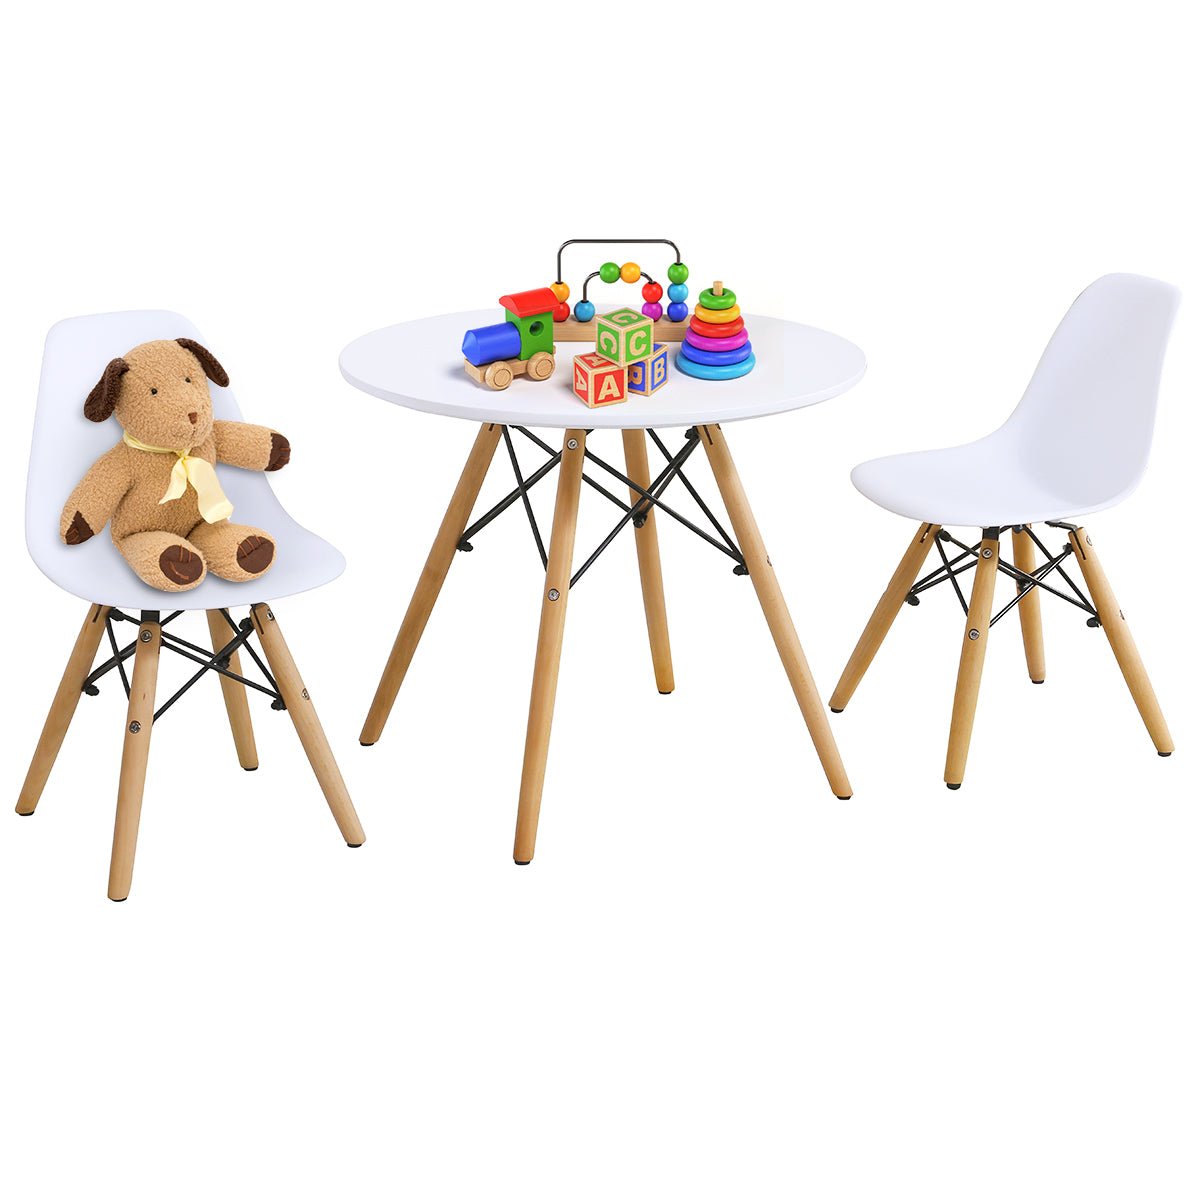 Contemporary Kids Table Set with 2 Chairs - Chic and Functional Design